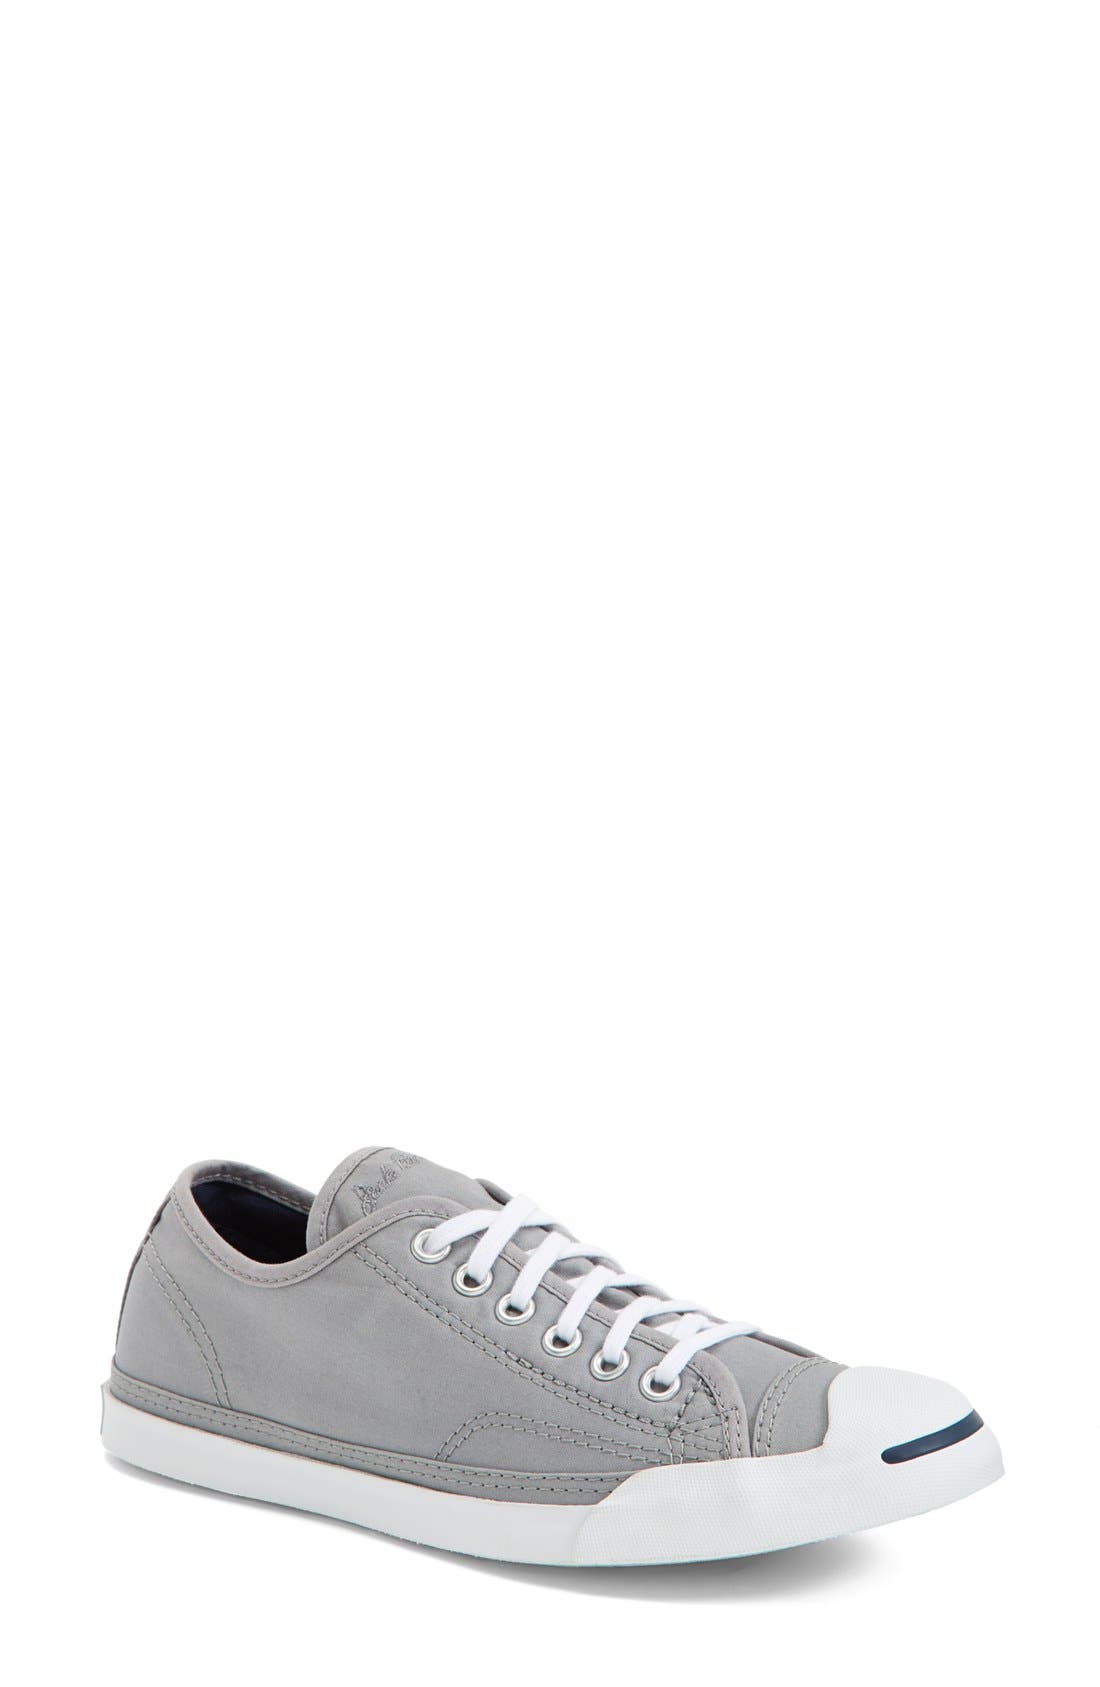 Converse 'Jack Purcell' Low Top Sneaker 